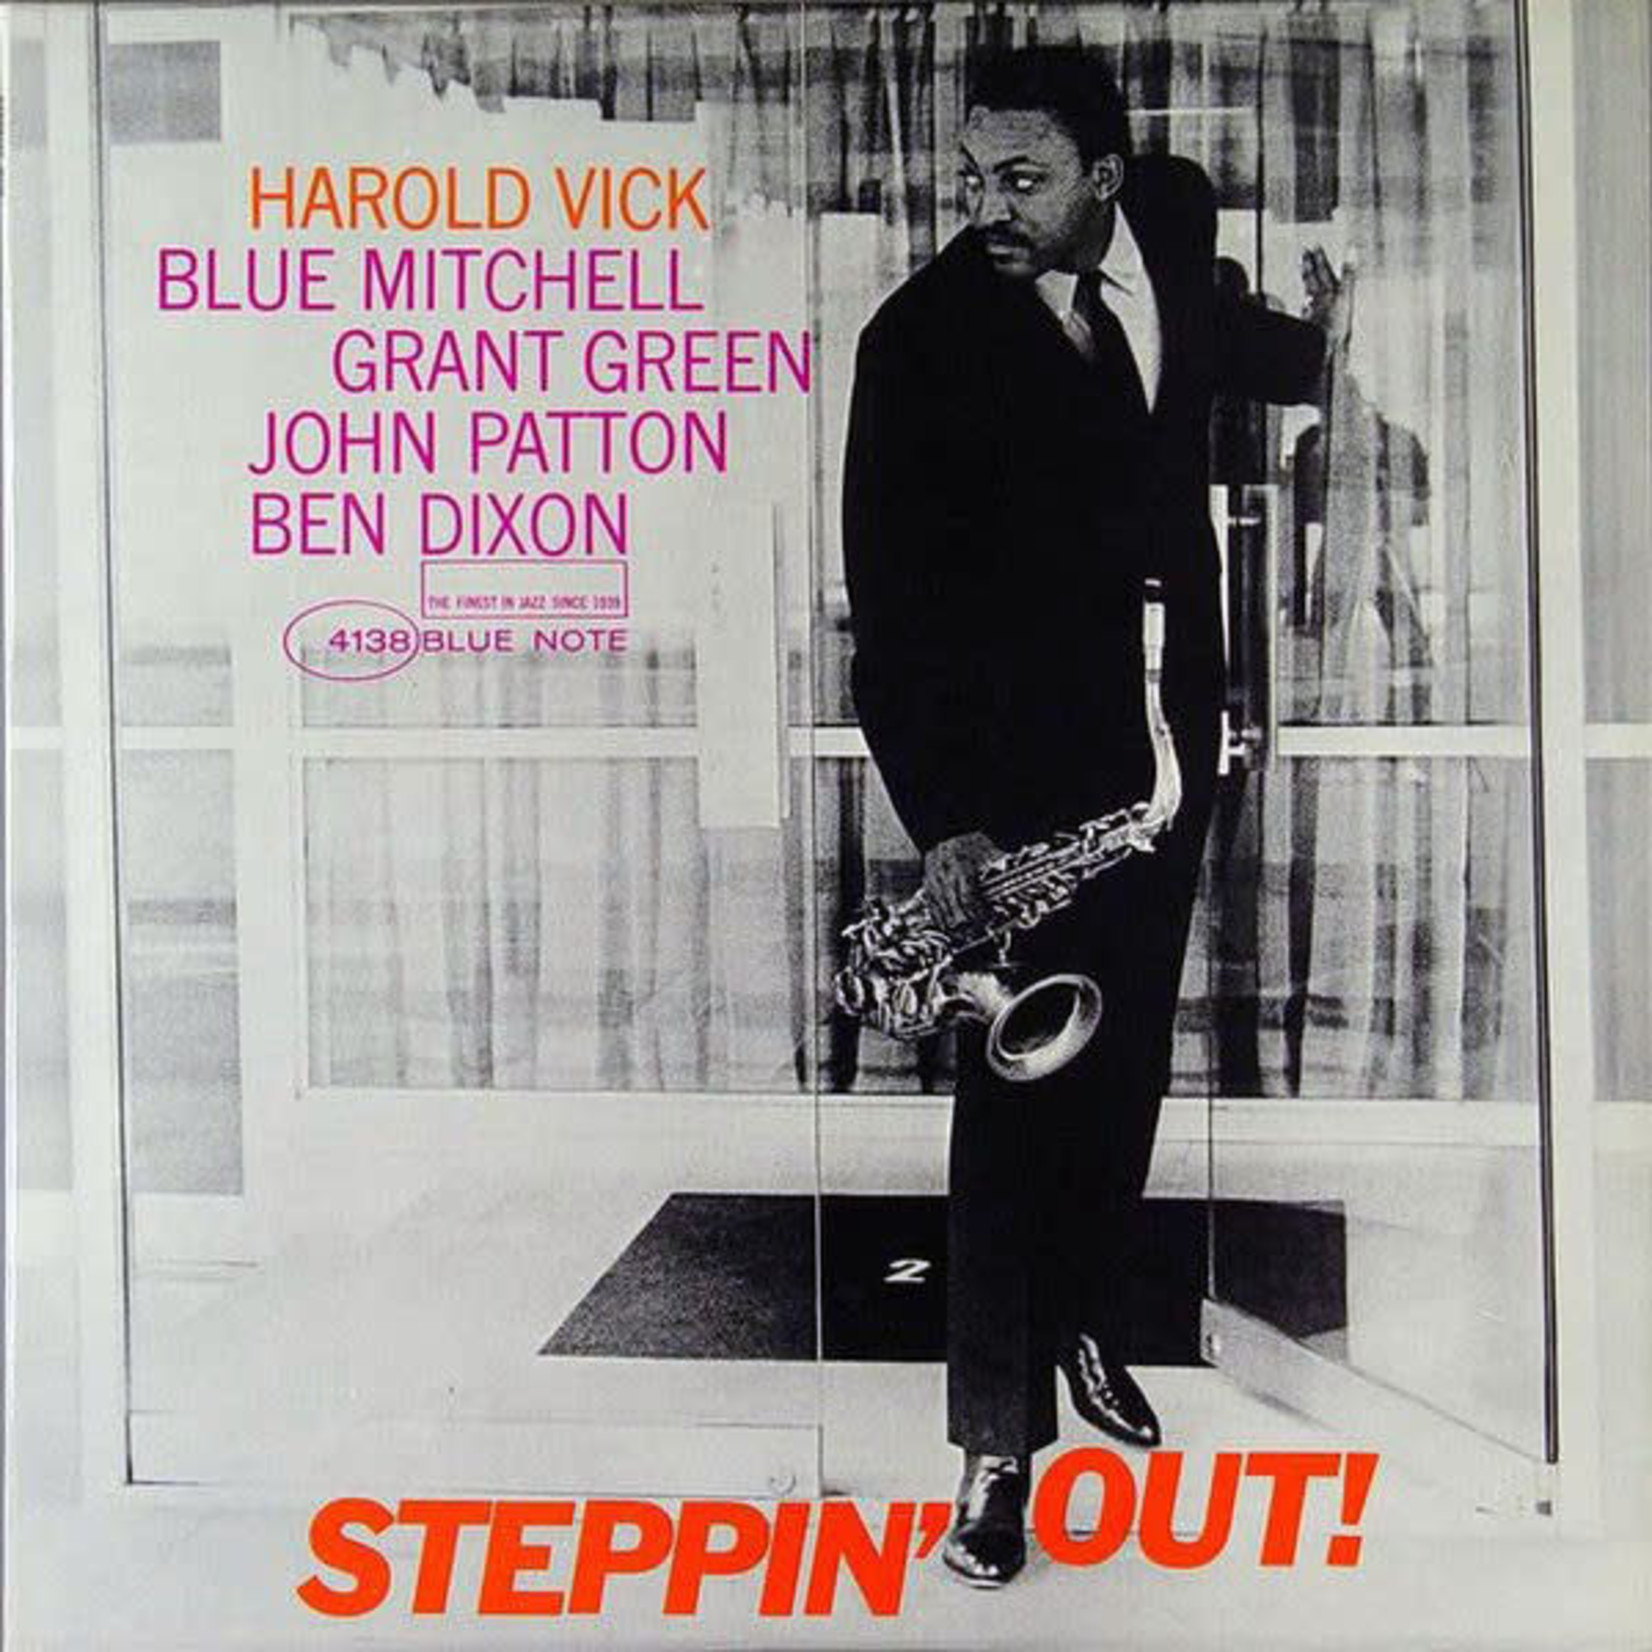 [New] Harold Vick - Steppin' Out! (Blue Note Tone Poet Series)